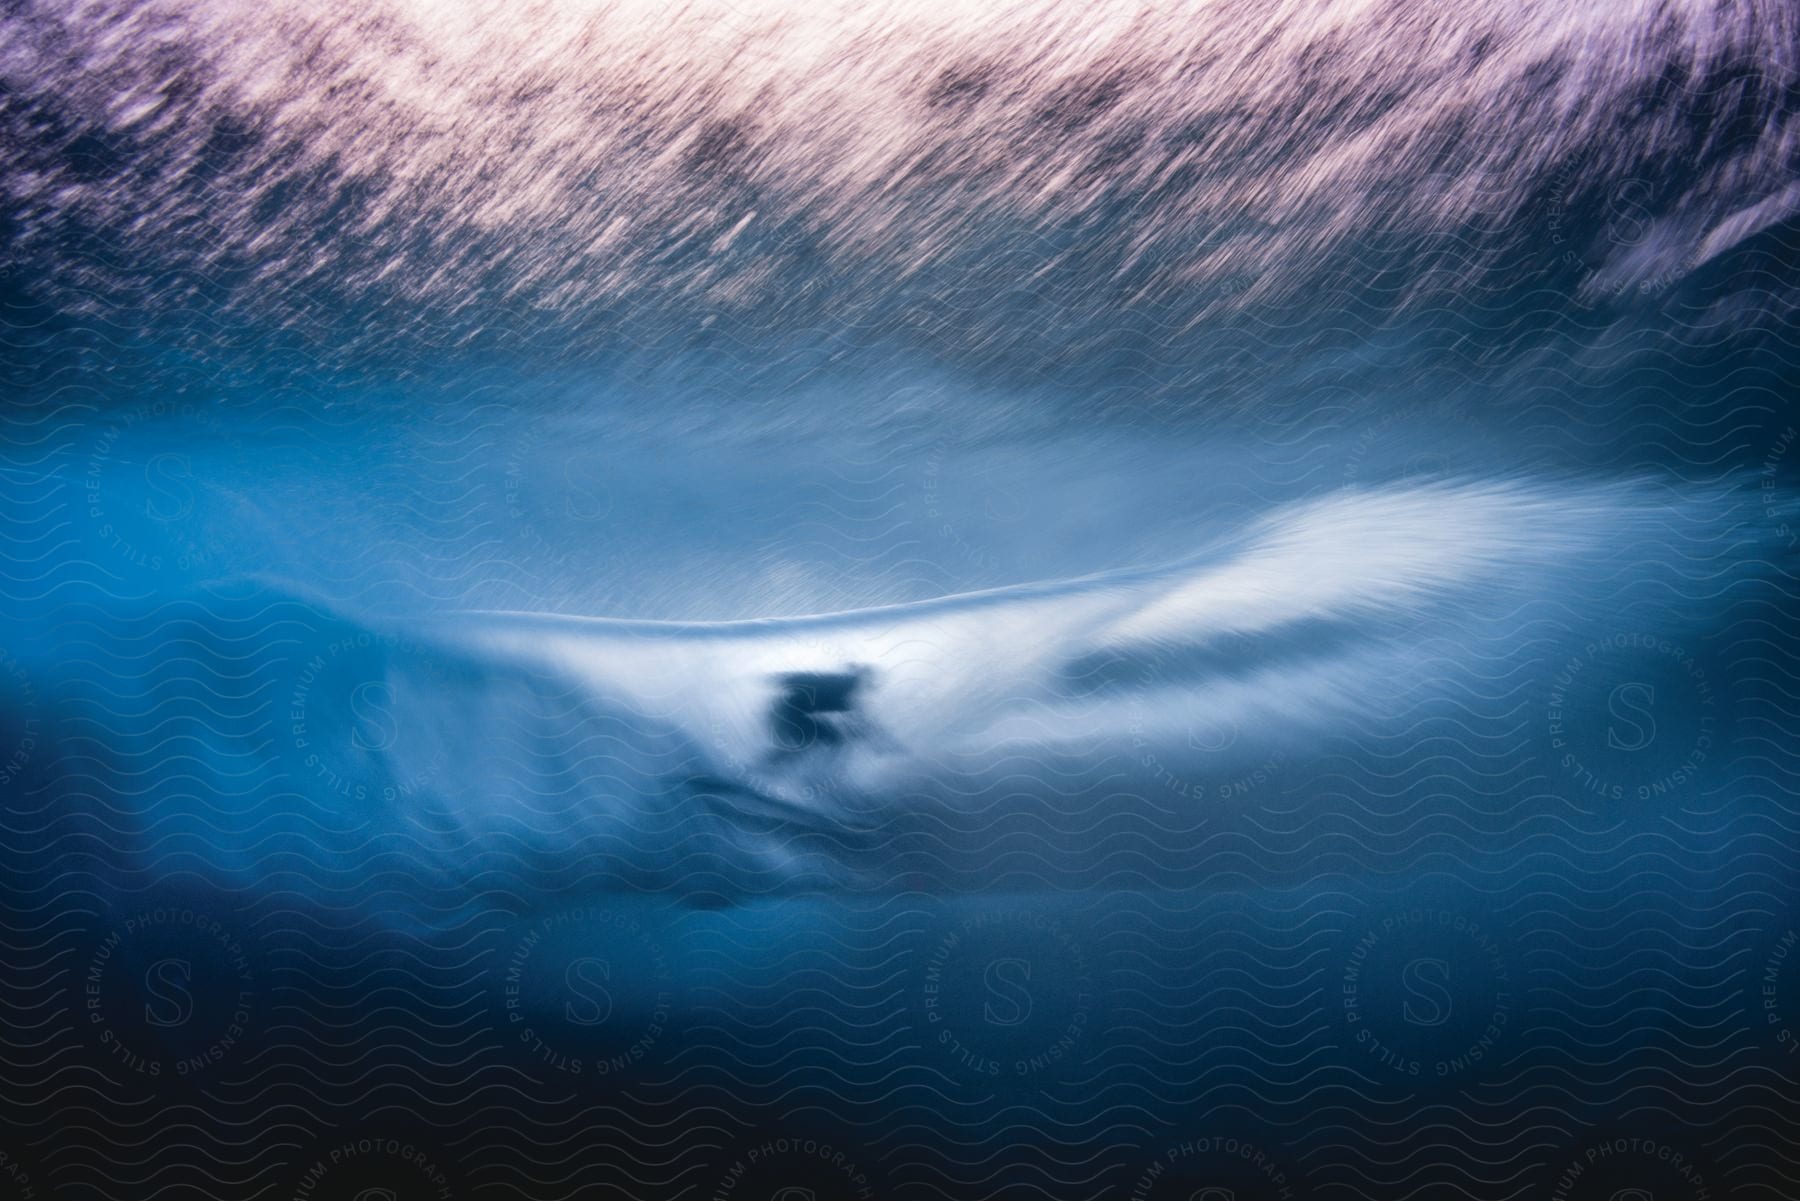 A surfer rides a wave in the ocean seen from underwater